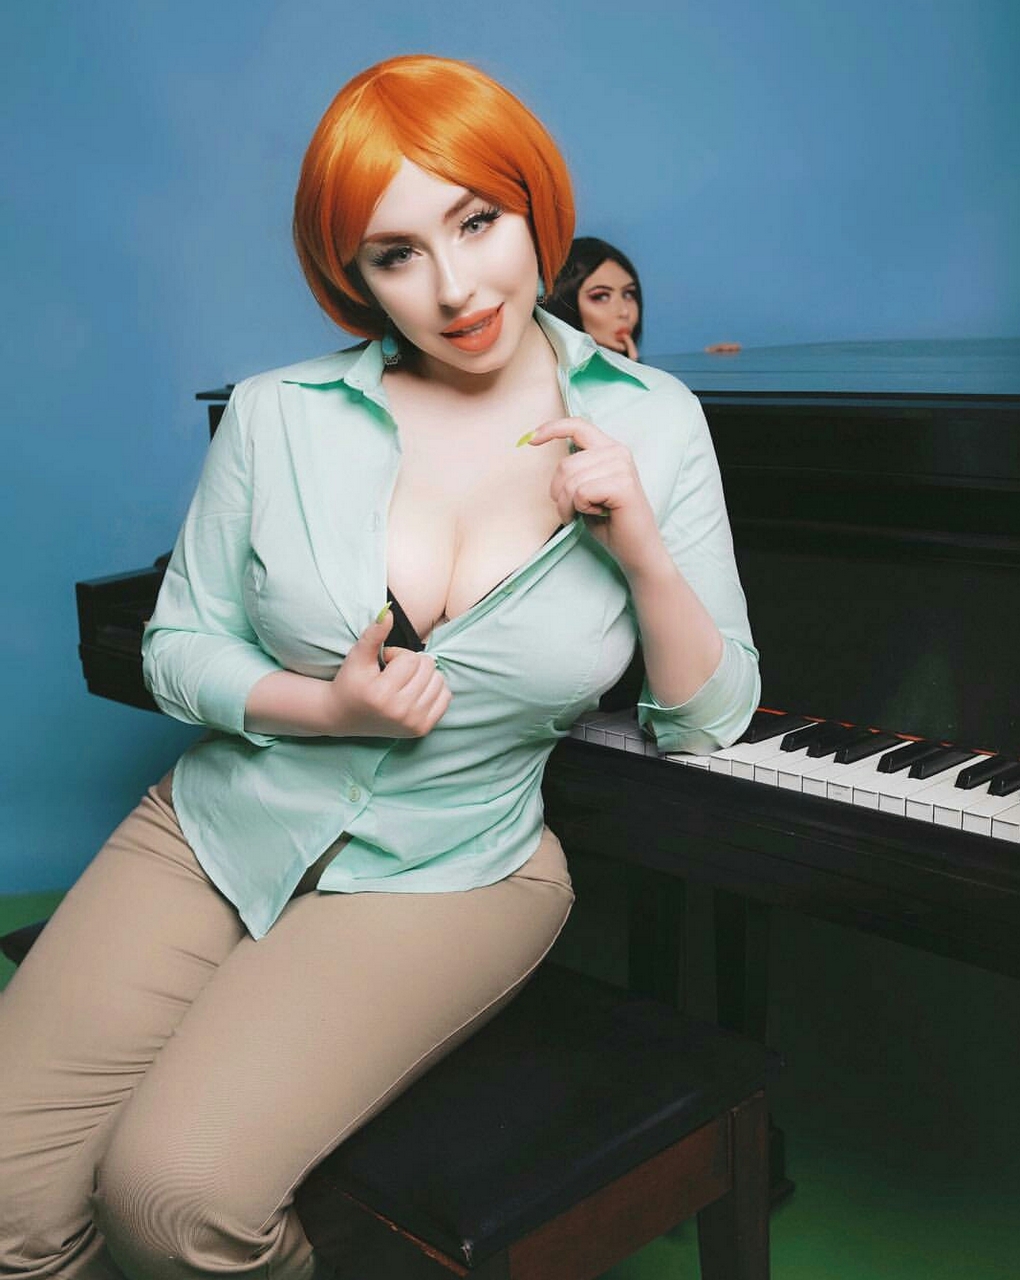 Lois Griffin From Family Guy By Bishoujo Mo